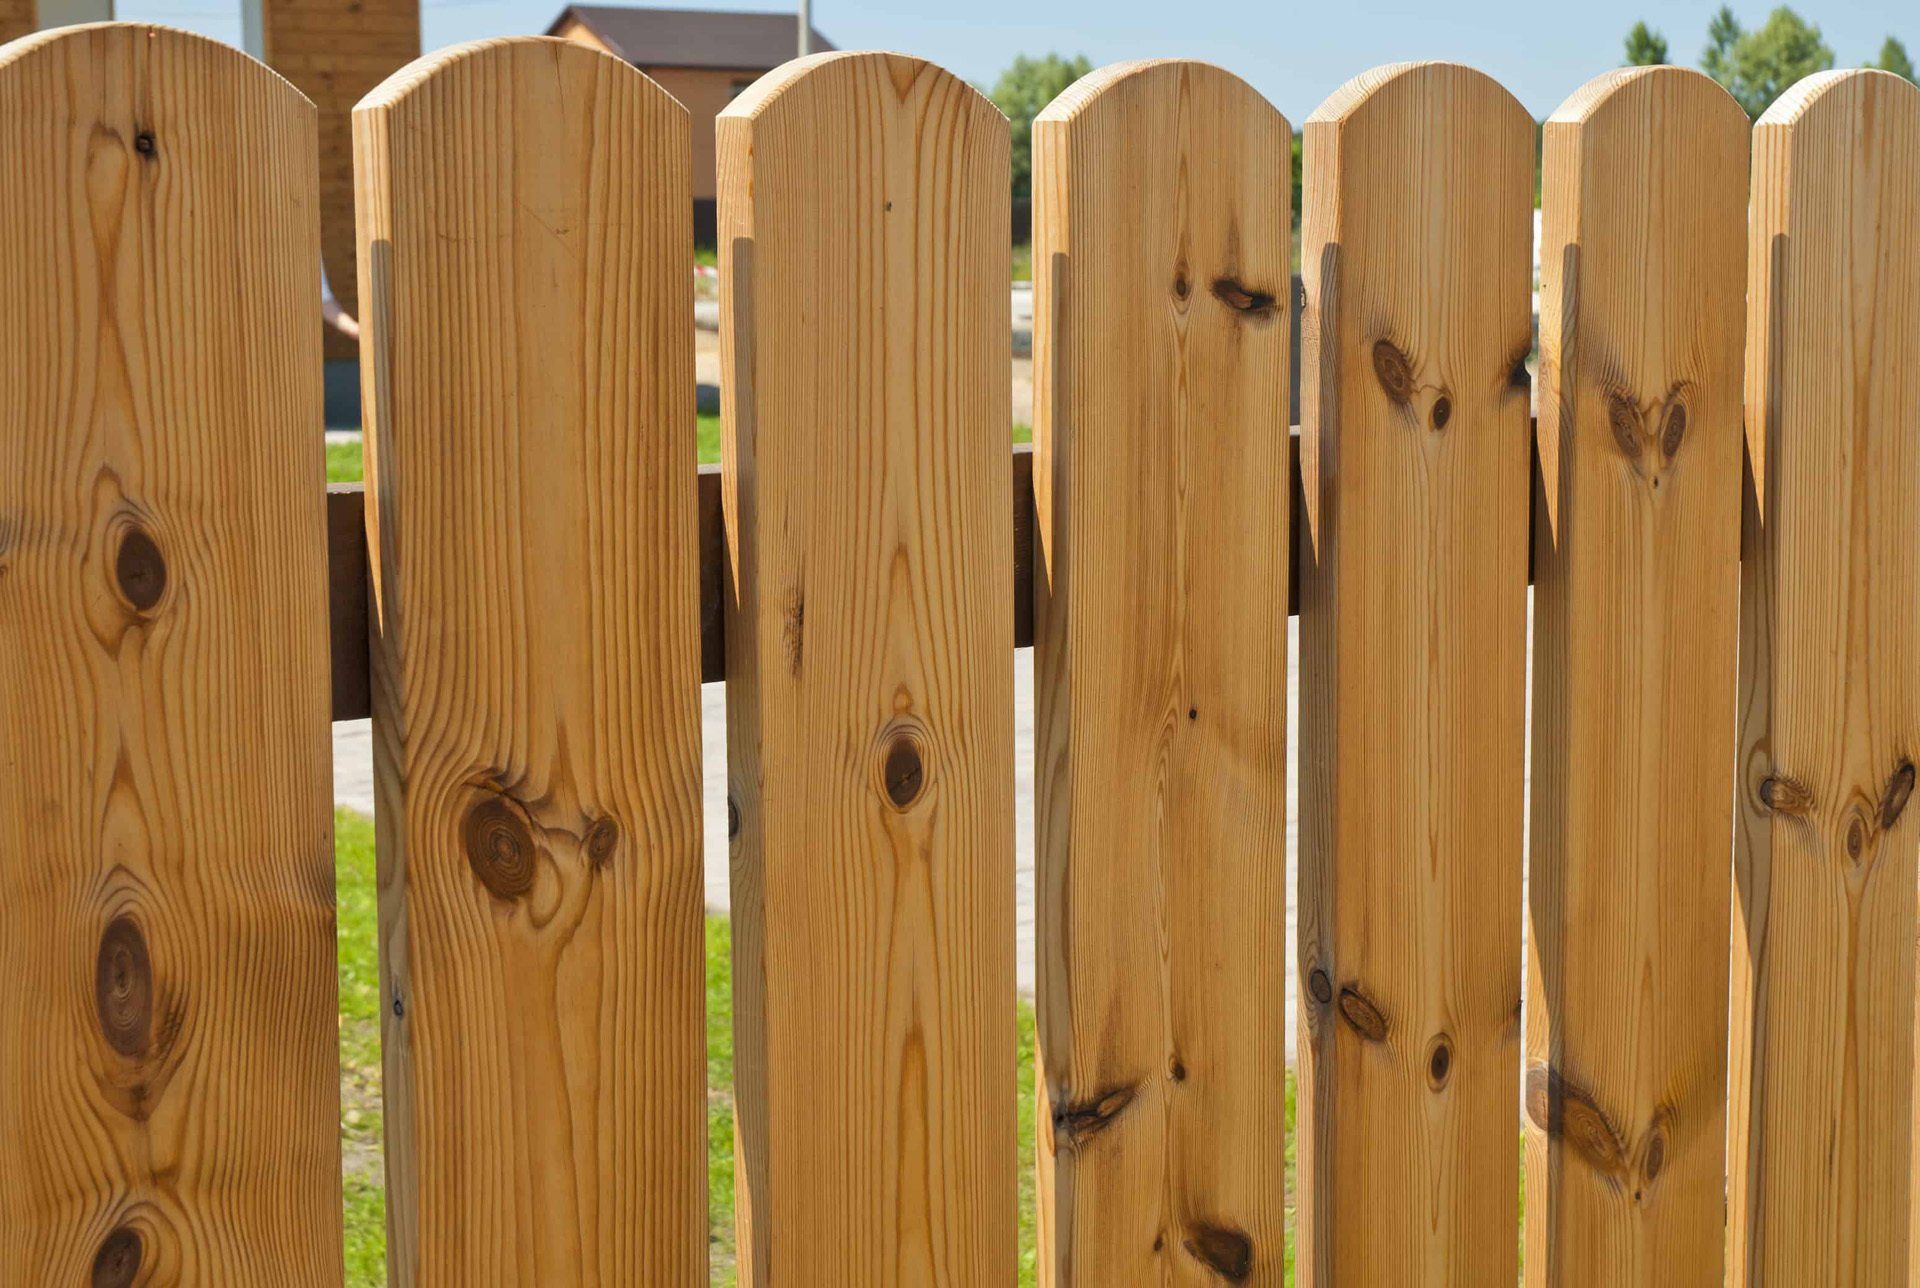 Wooden fence styling options